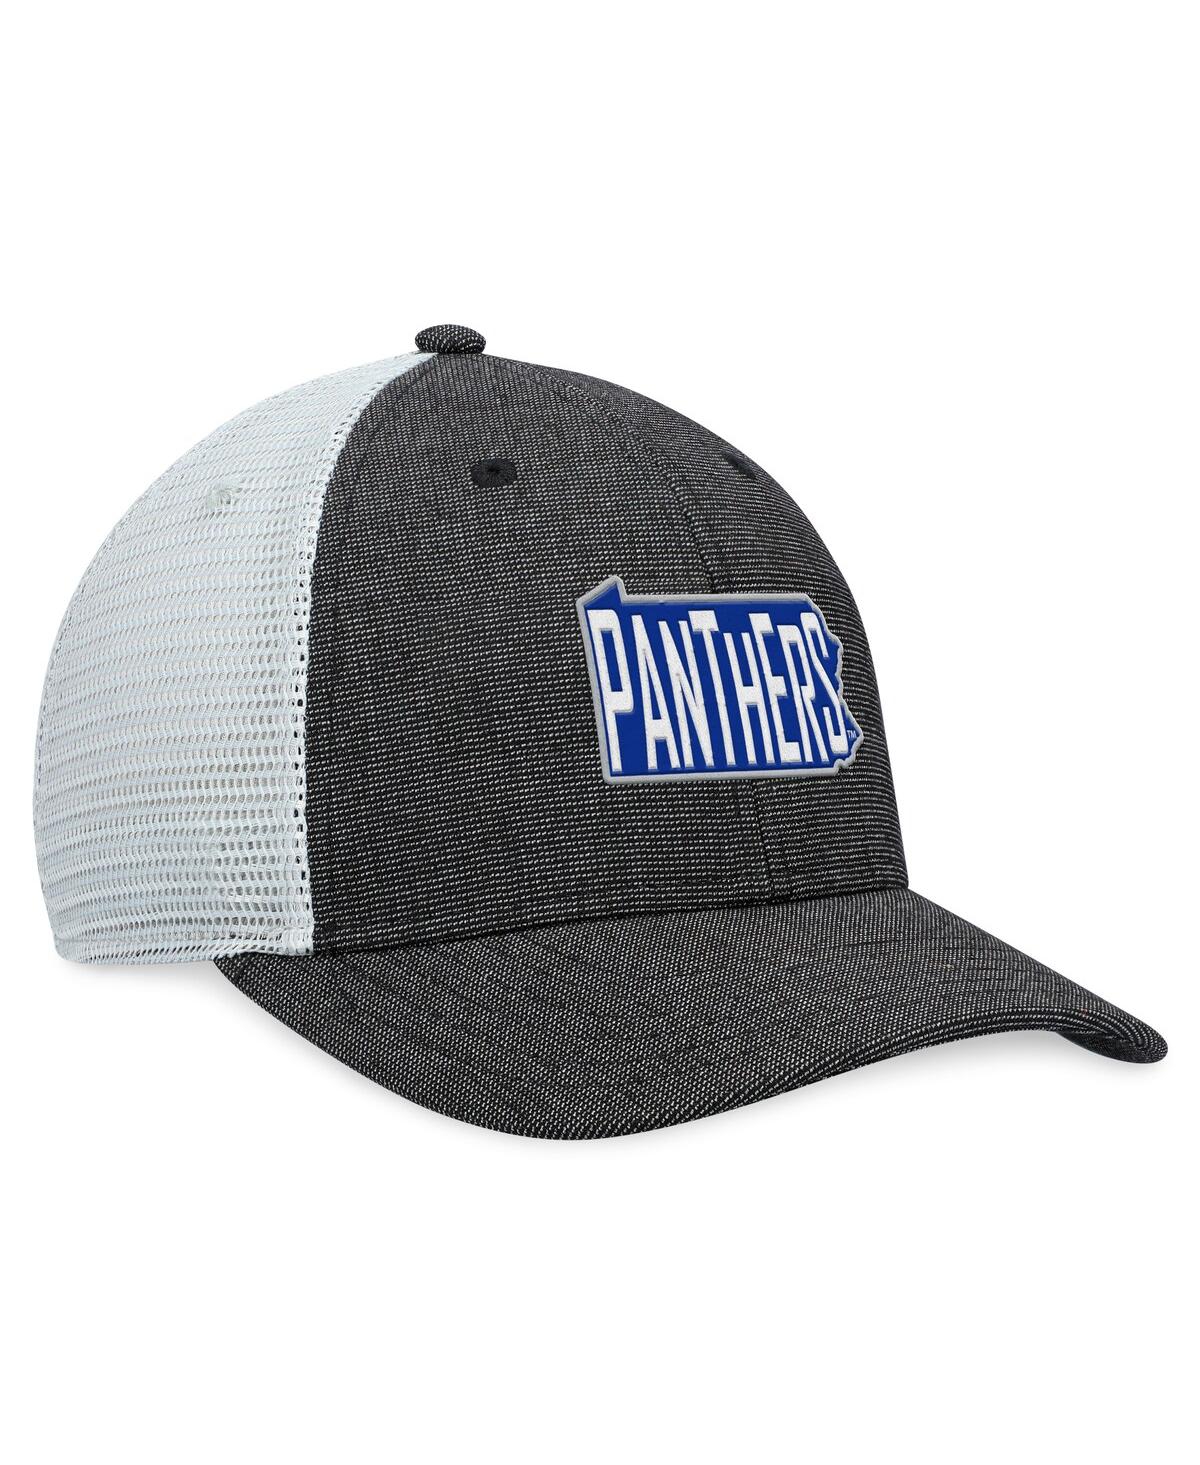 Shop Top Of The World Men's  Charcoal, White Pitt Panthers Townhall Trucker Snapback Hat In Charcoal,white